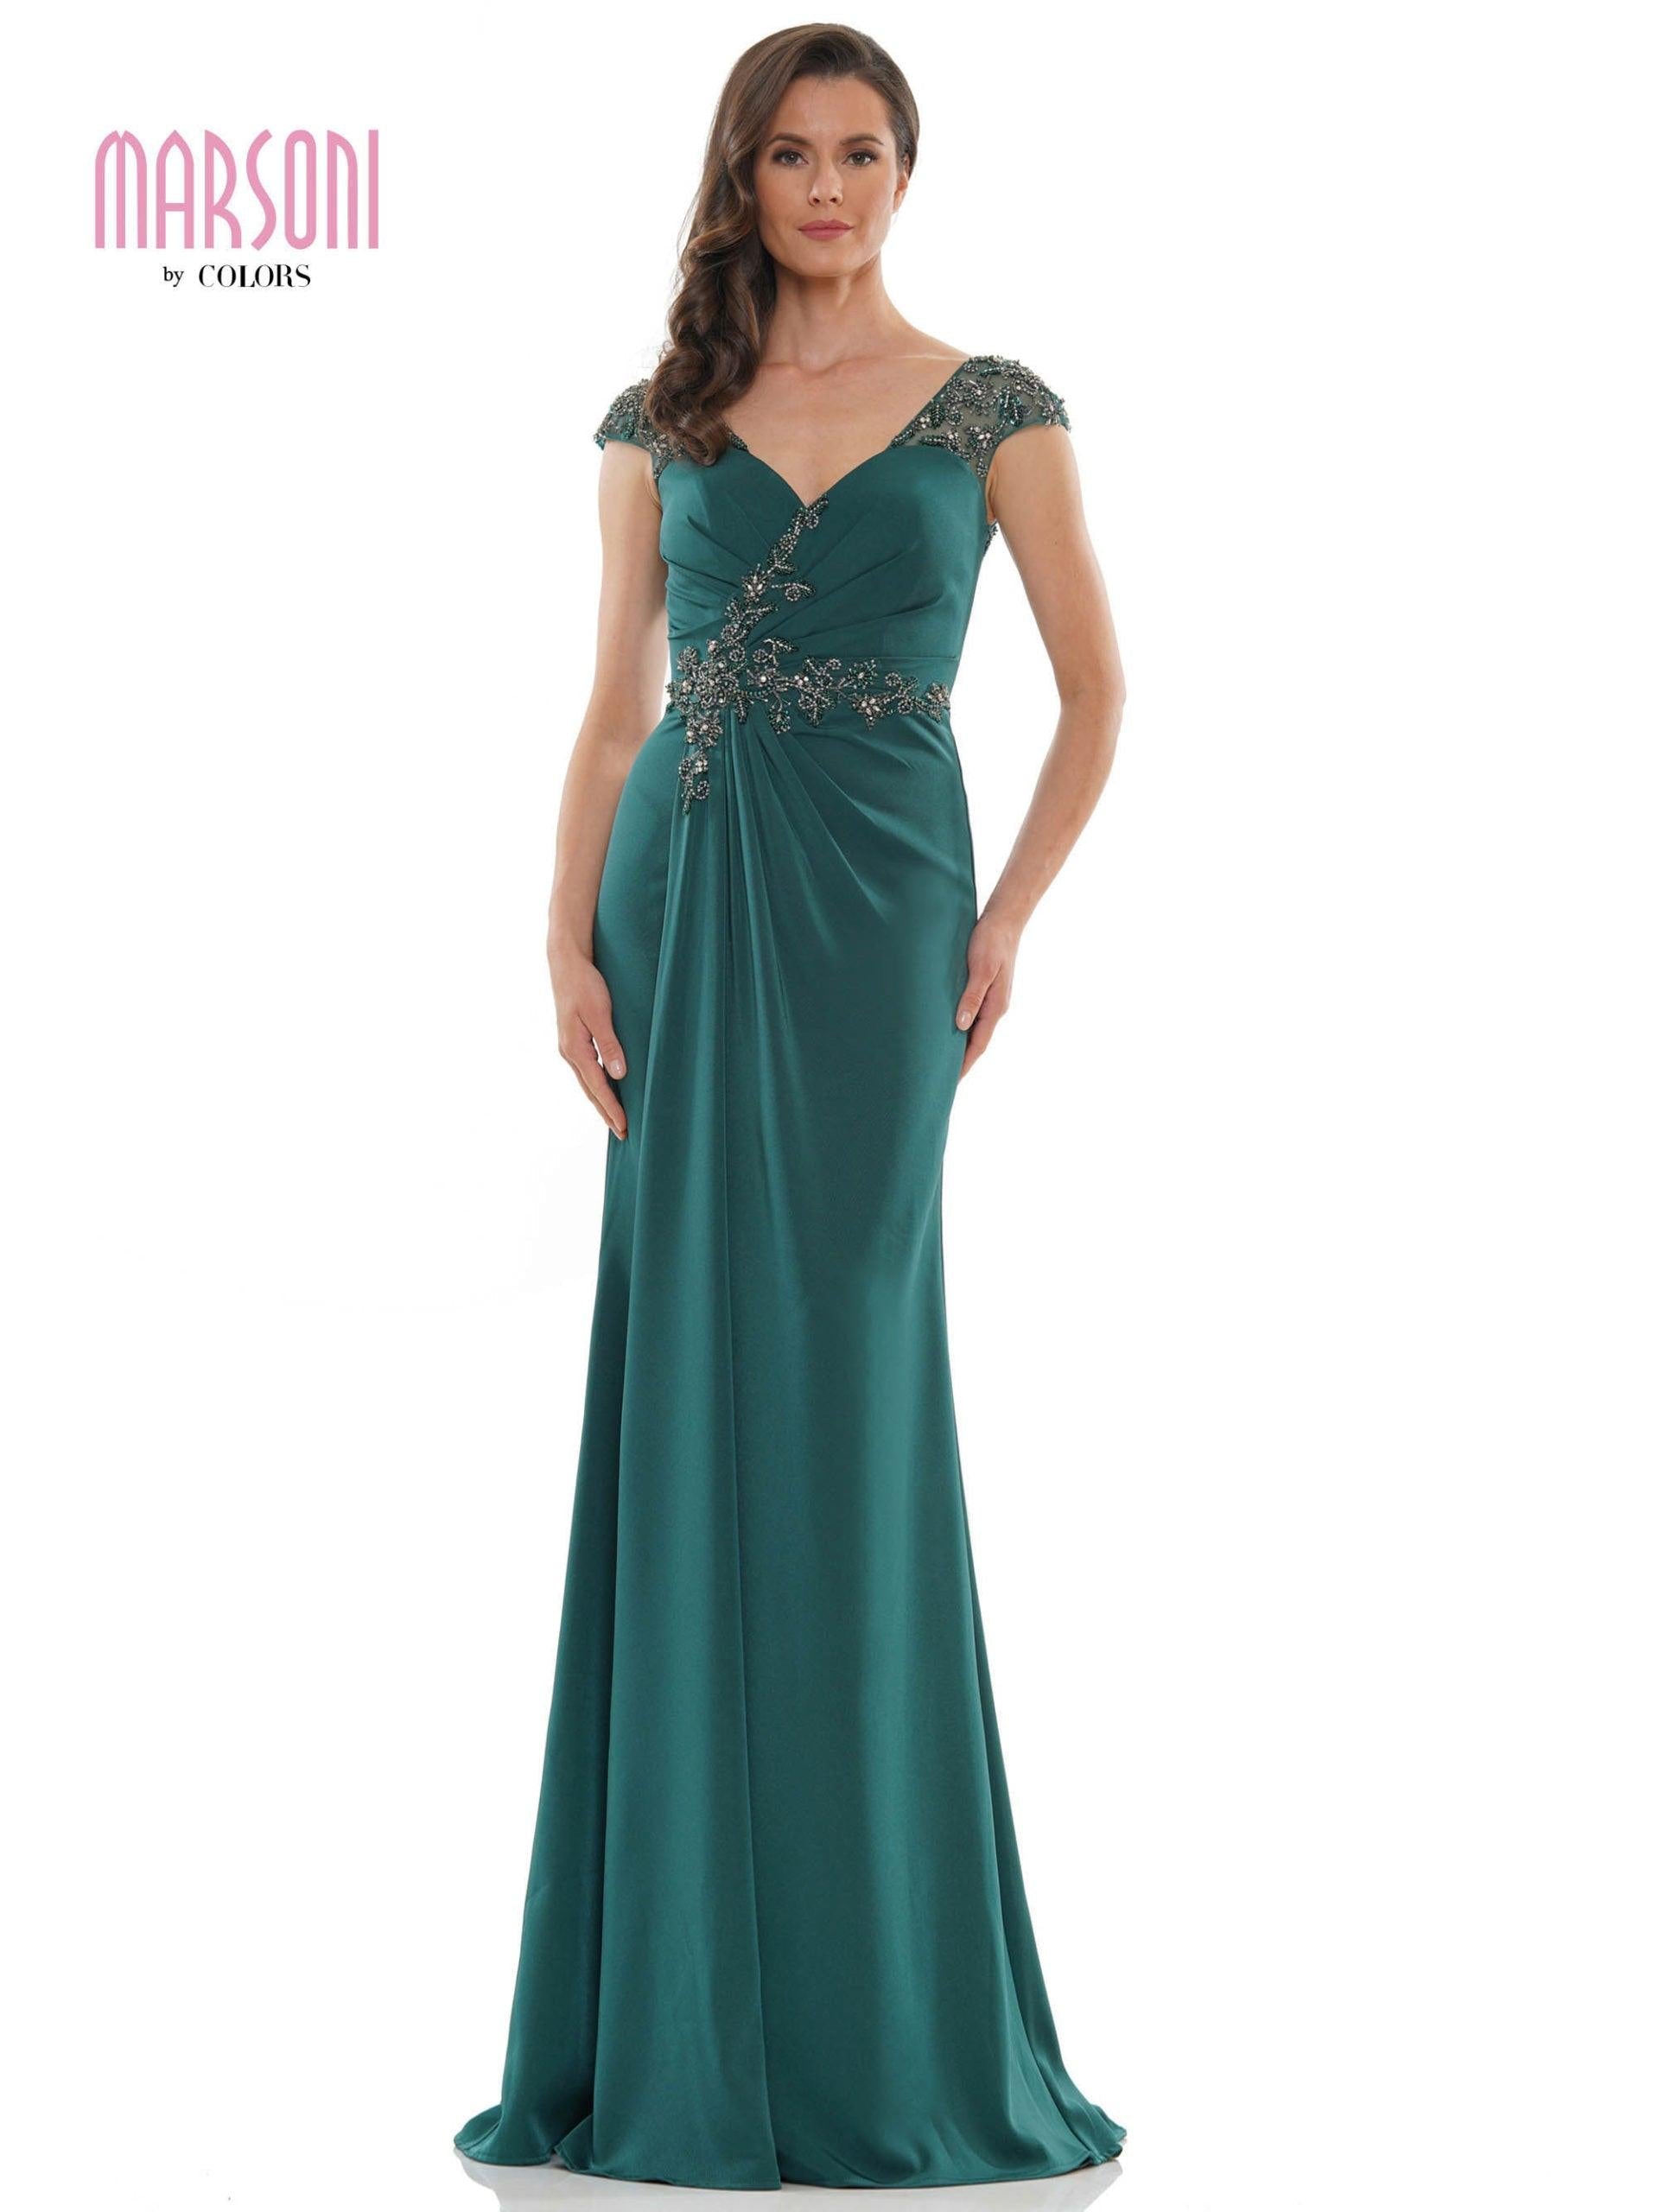 Marsoni Mother of the Bride Long Formal Dress 1133 - The Dress Outlet